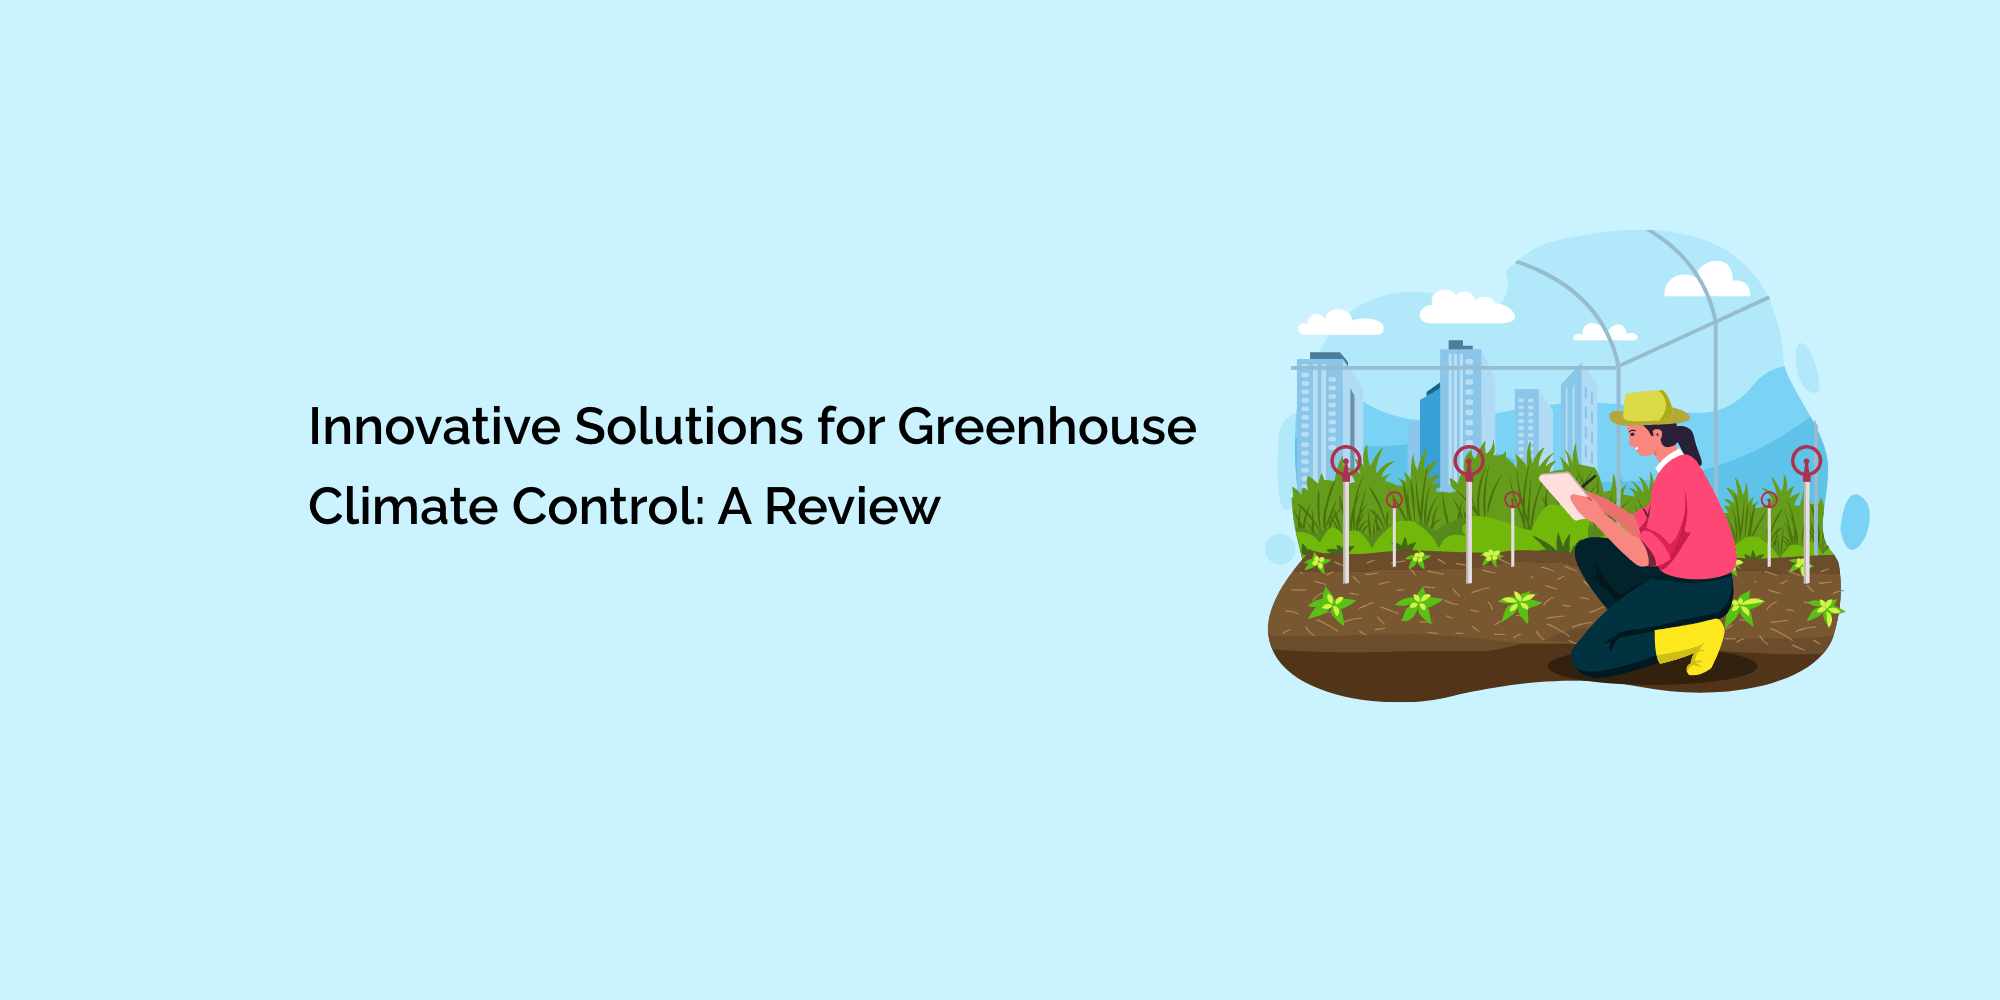 Innovative Solutions for Greenhouse Climate Control: A Review